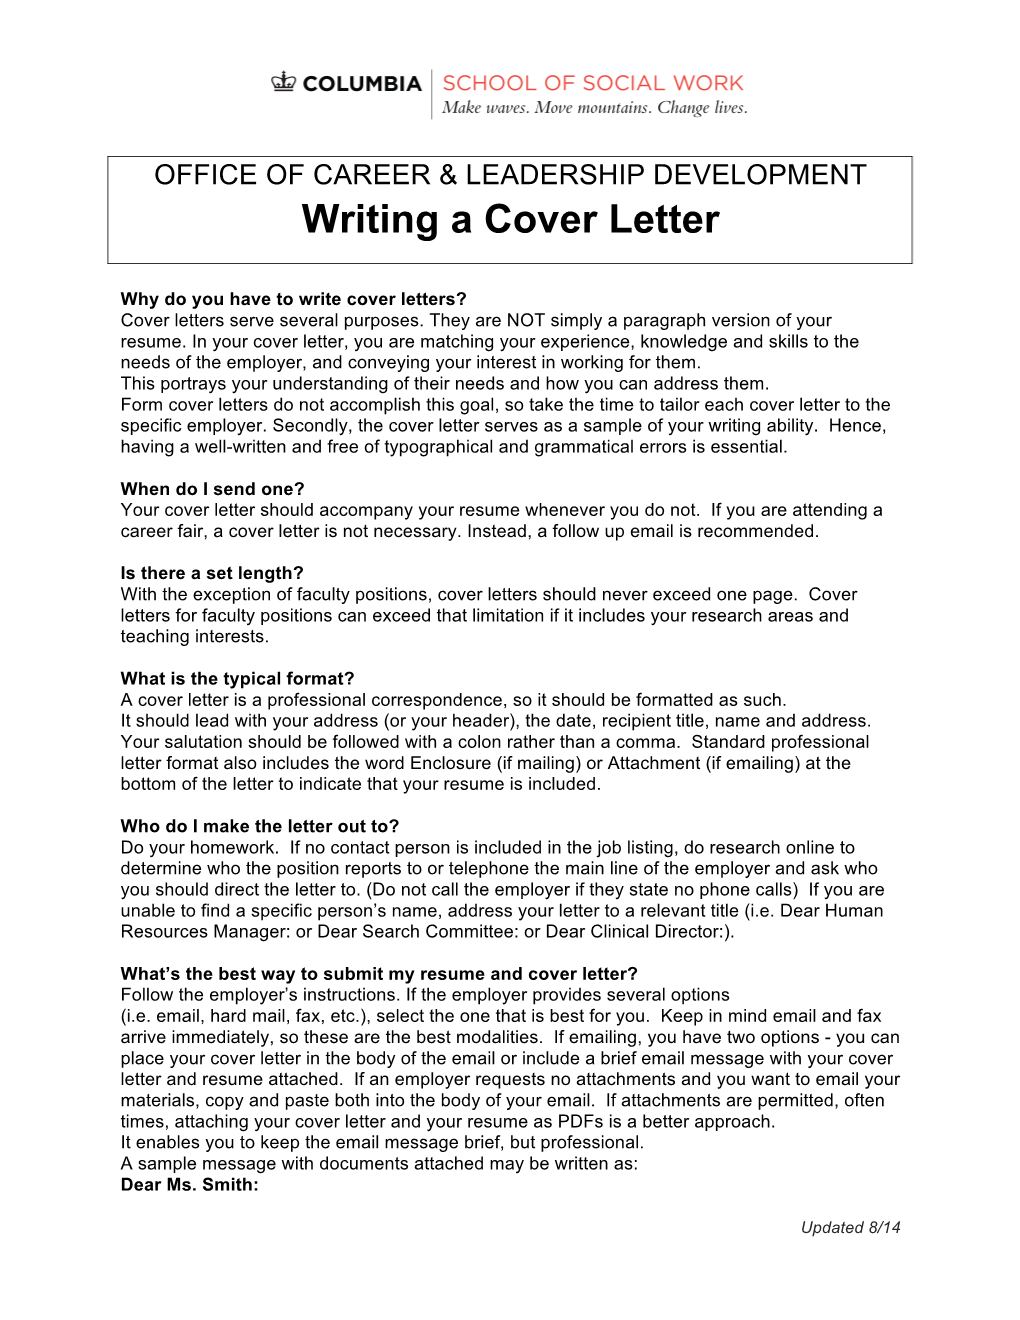 Writing a Cover Letter